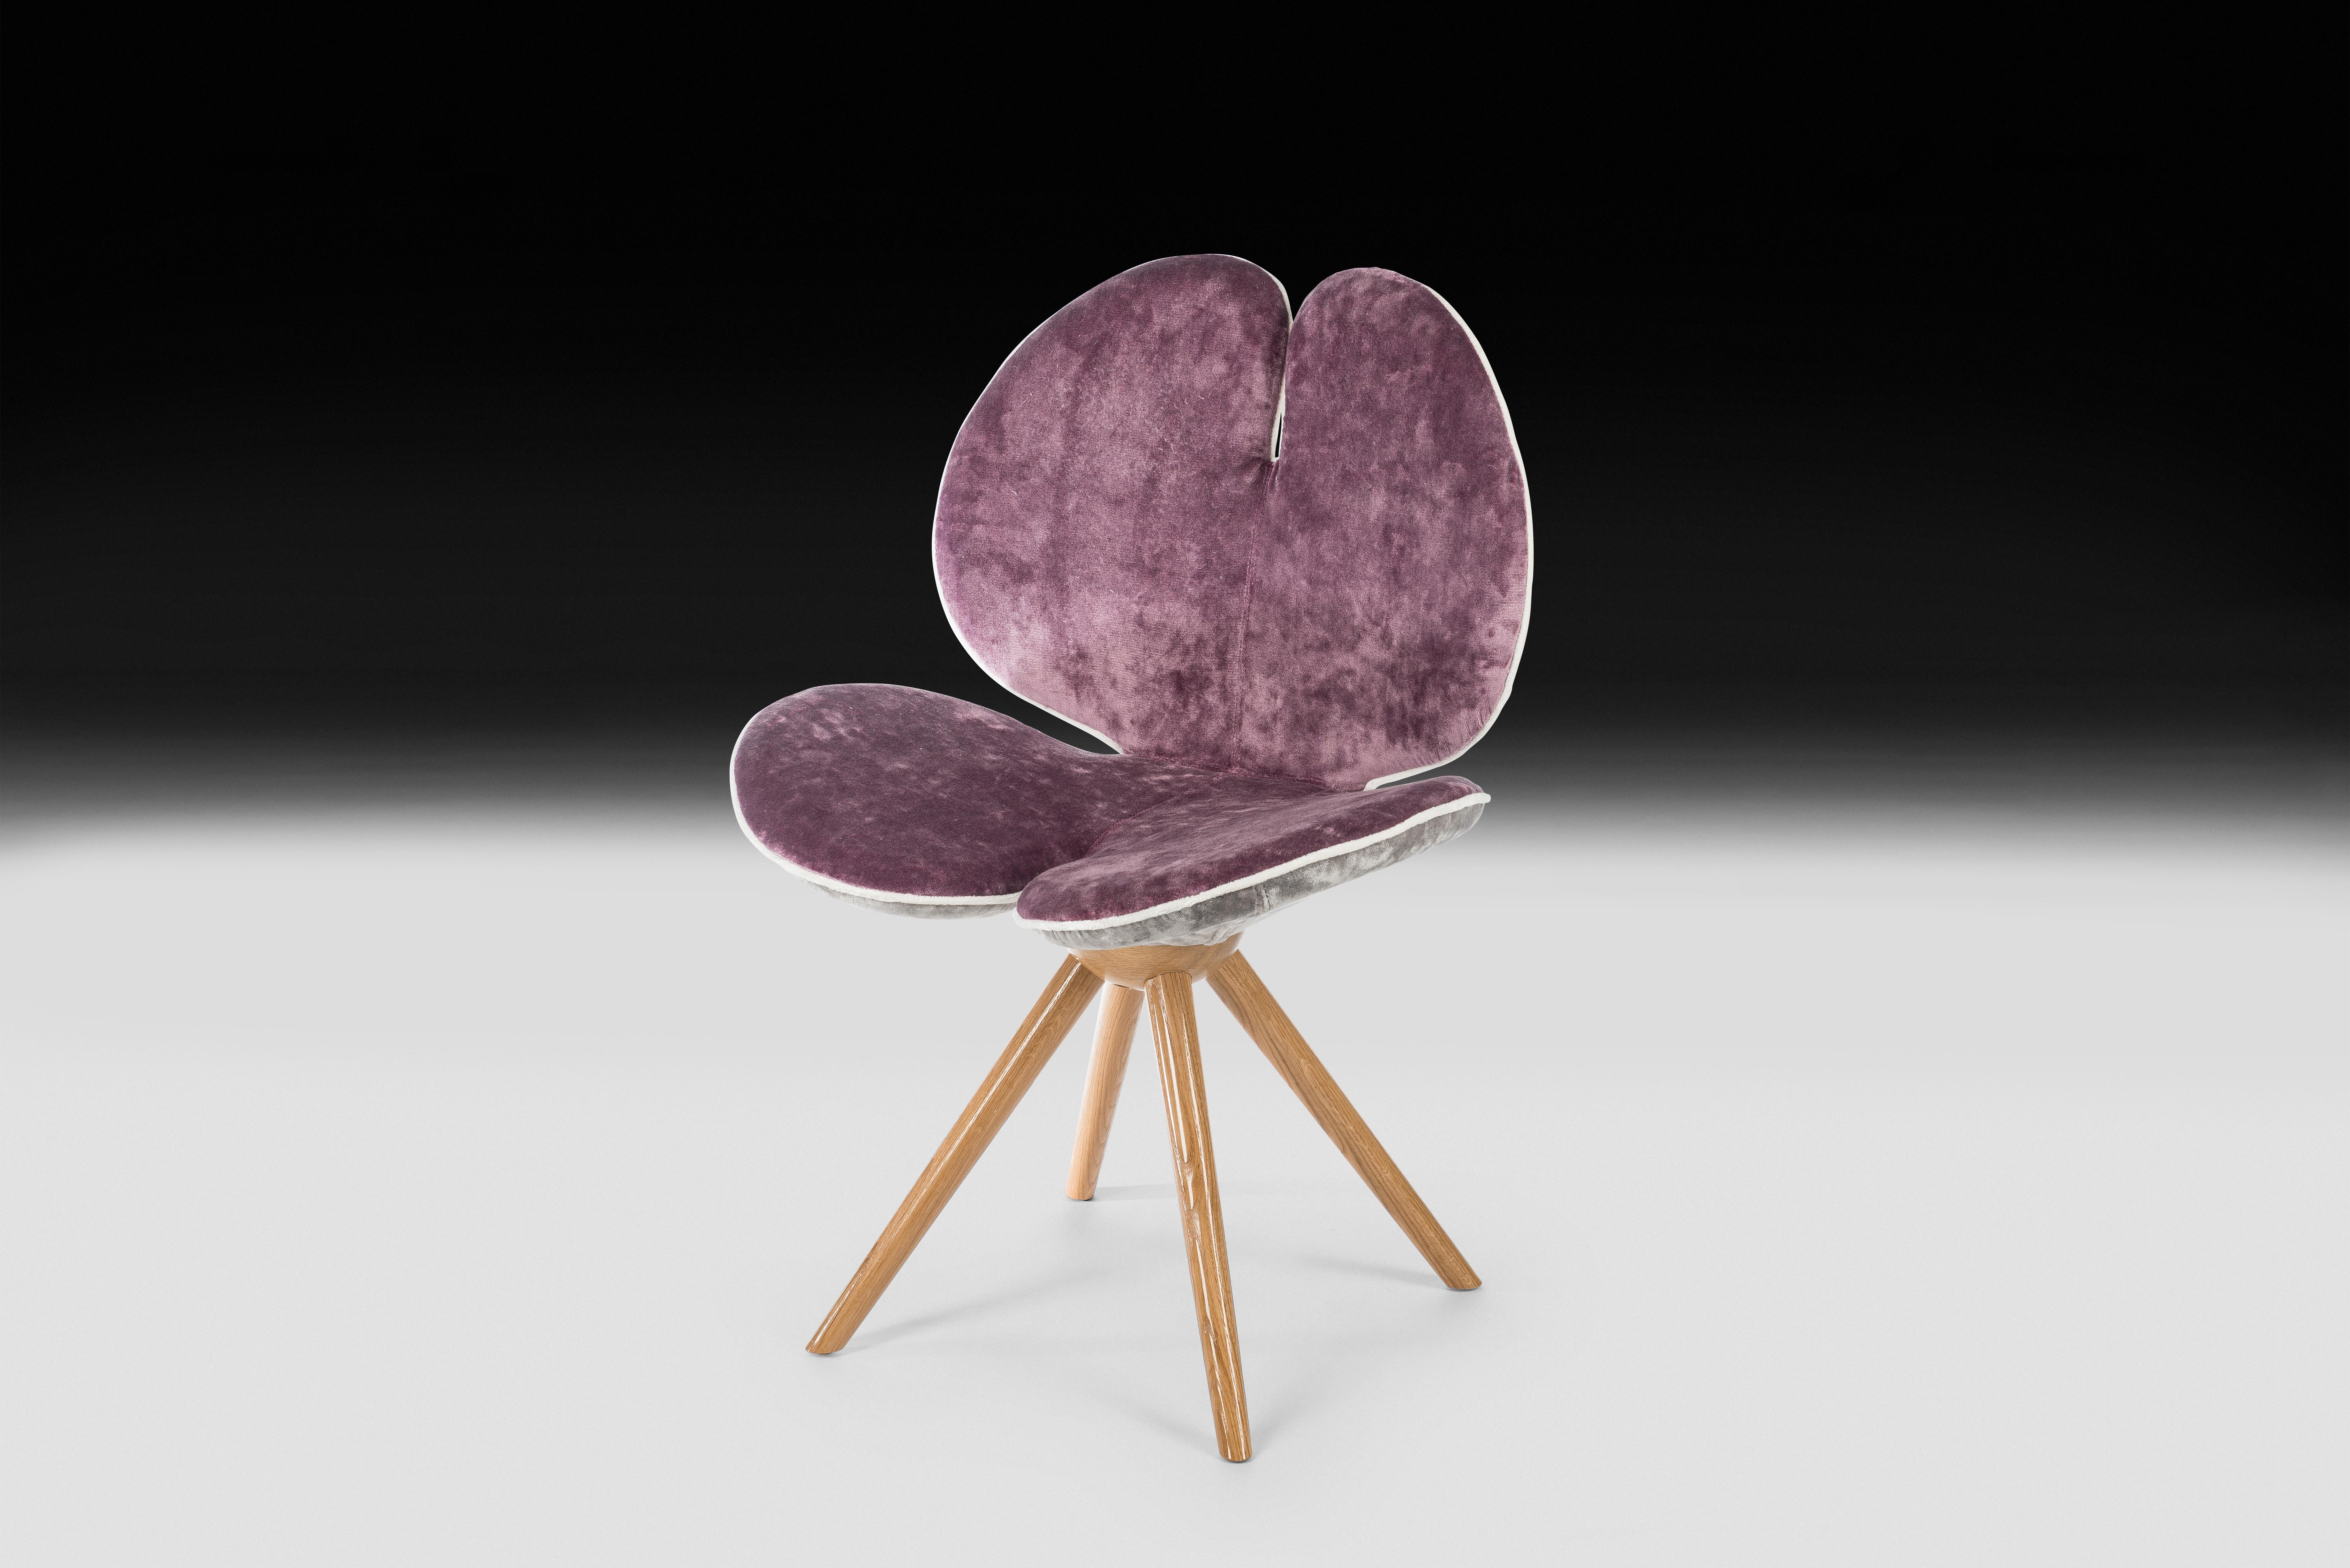 They are the harbingers of spring, nature awakens with them and colours emerge. Pansies are the inspiration for the new VG chair, with its slender legs of Canaletto walnut and the enveloping seat upholstered with fresh spring shades of Rubelli